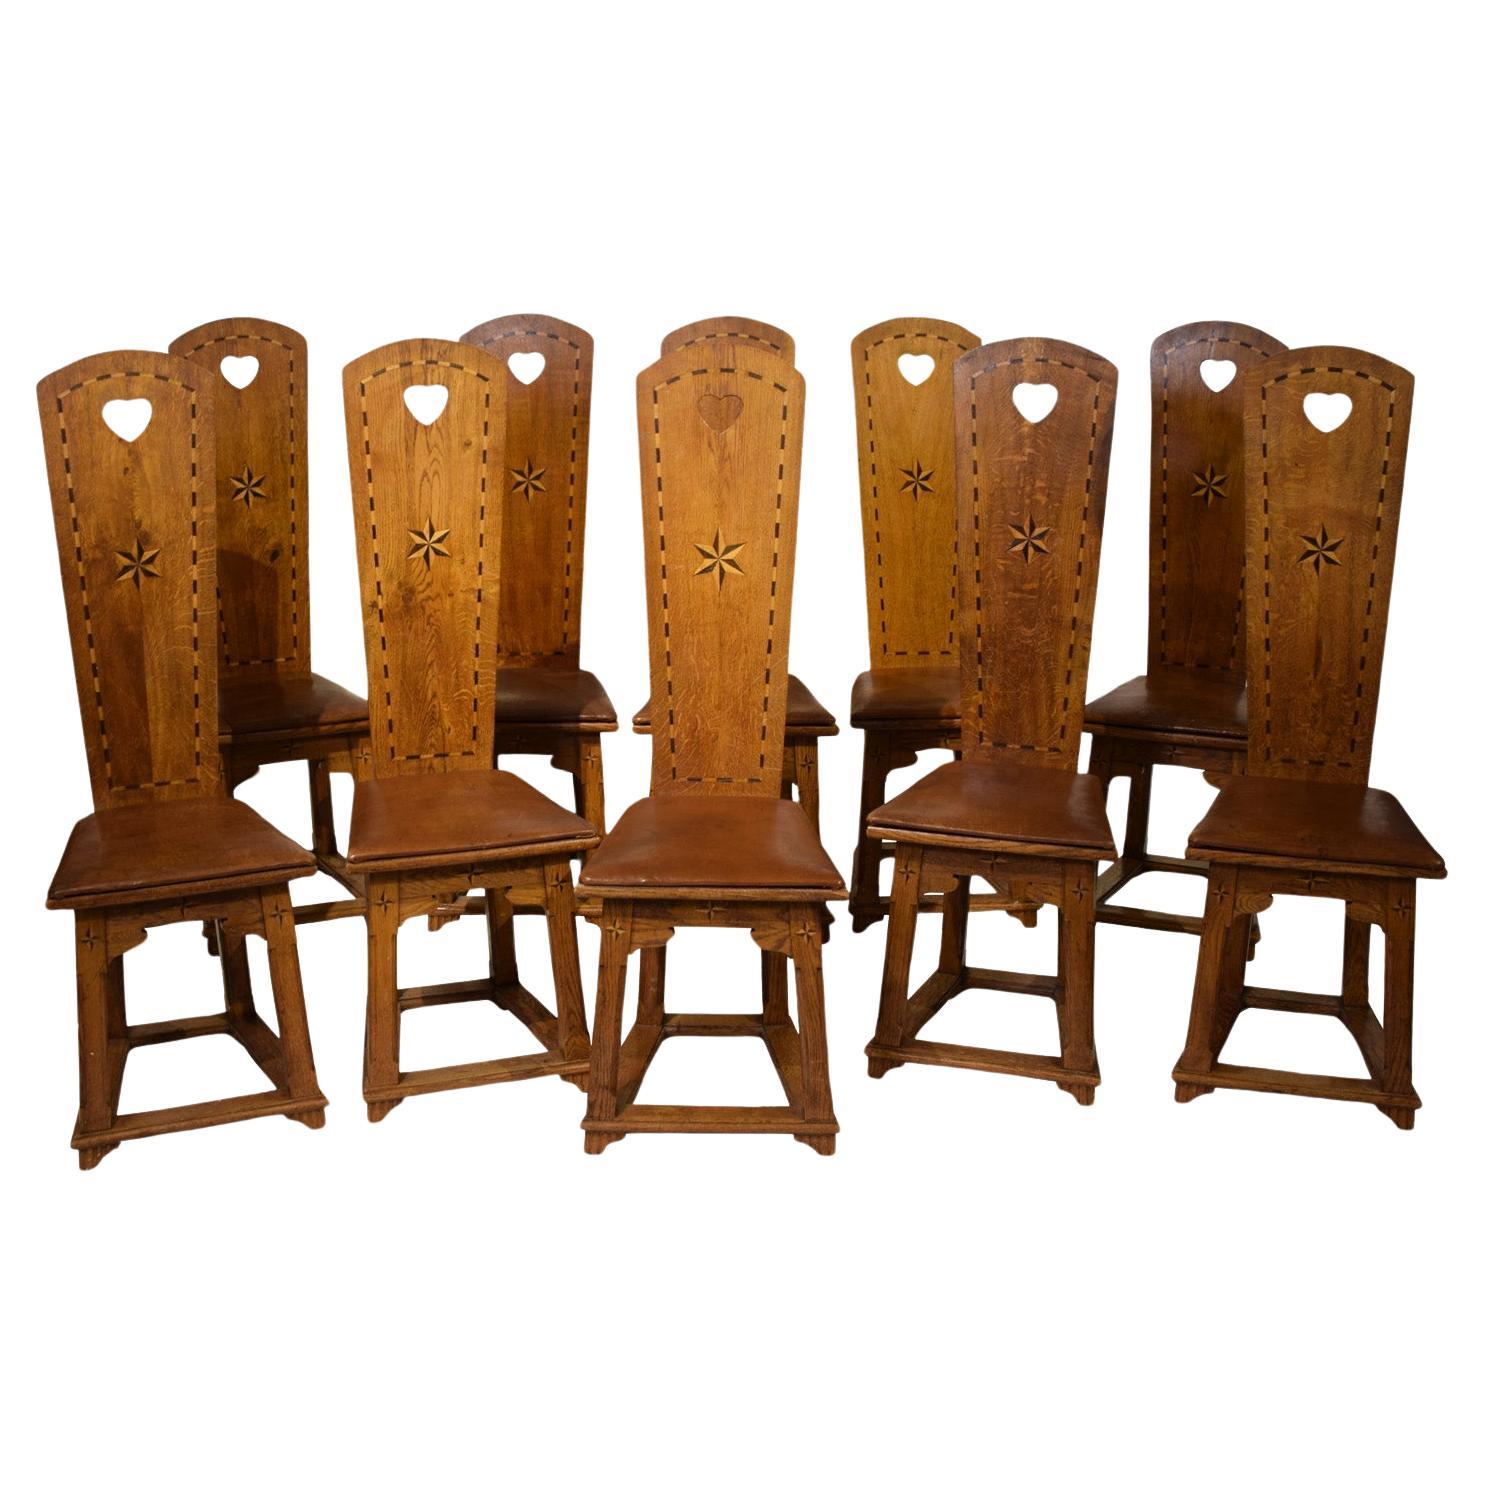 Rare 10 Arts & Craft Chairs from Villa Foresta Lidingö Sweden 1908-1910 For Sale